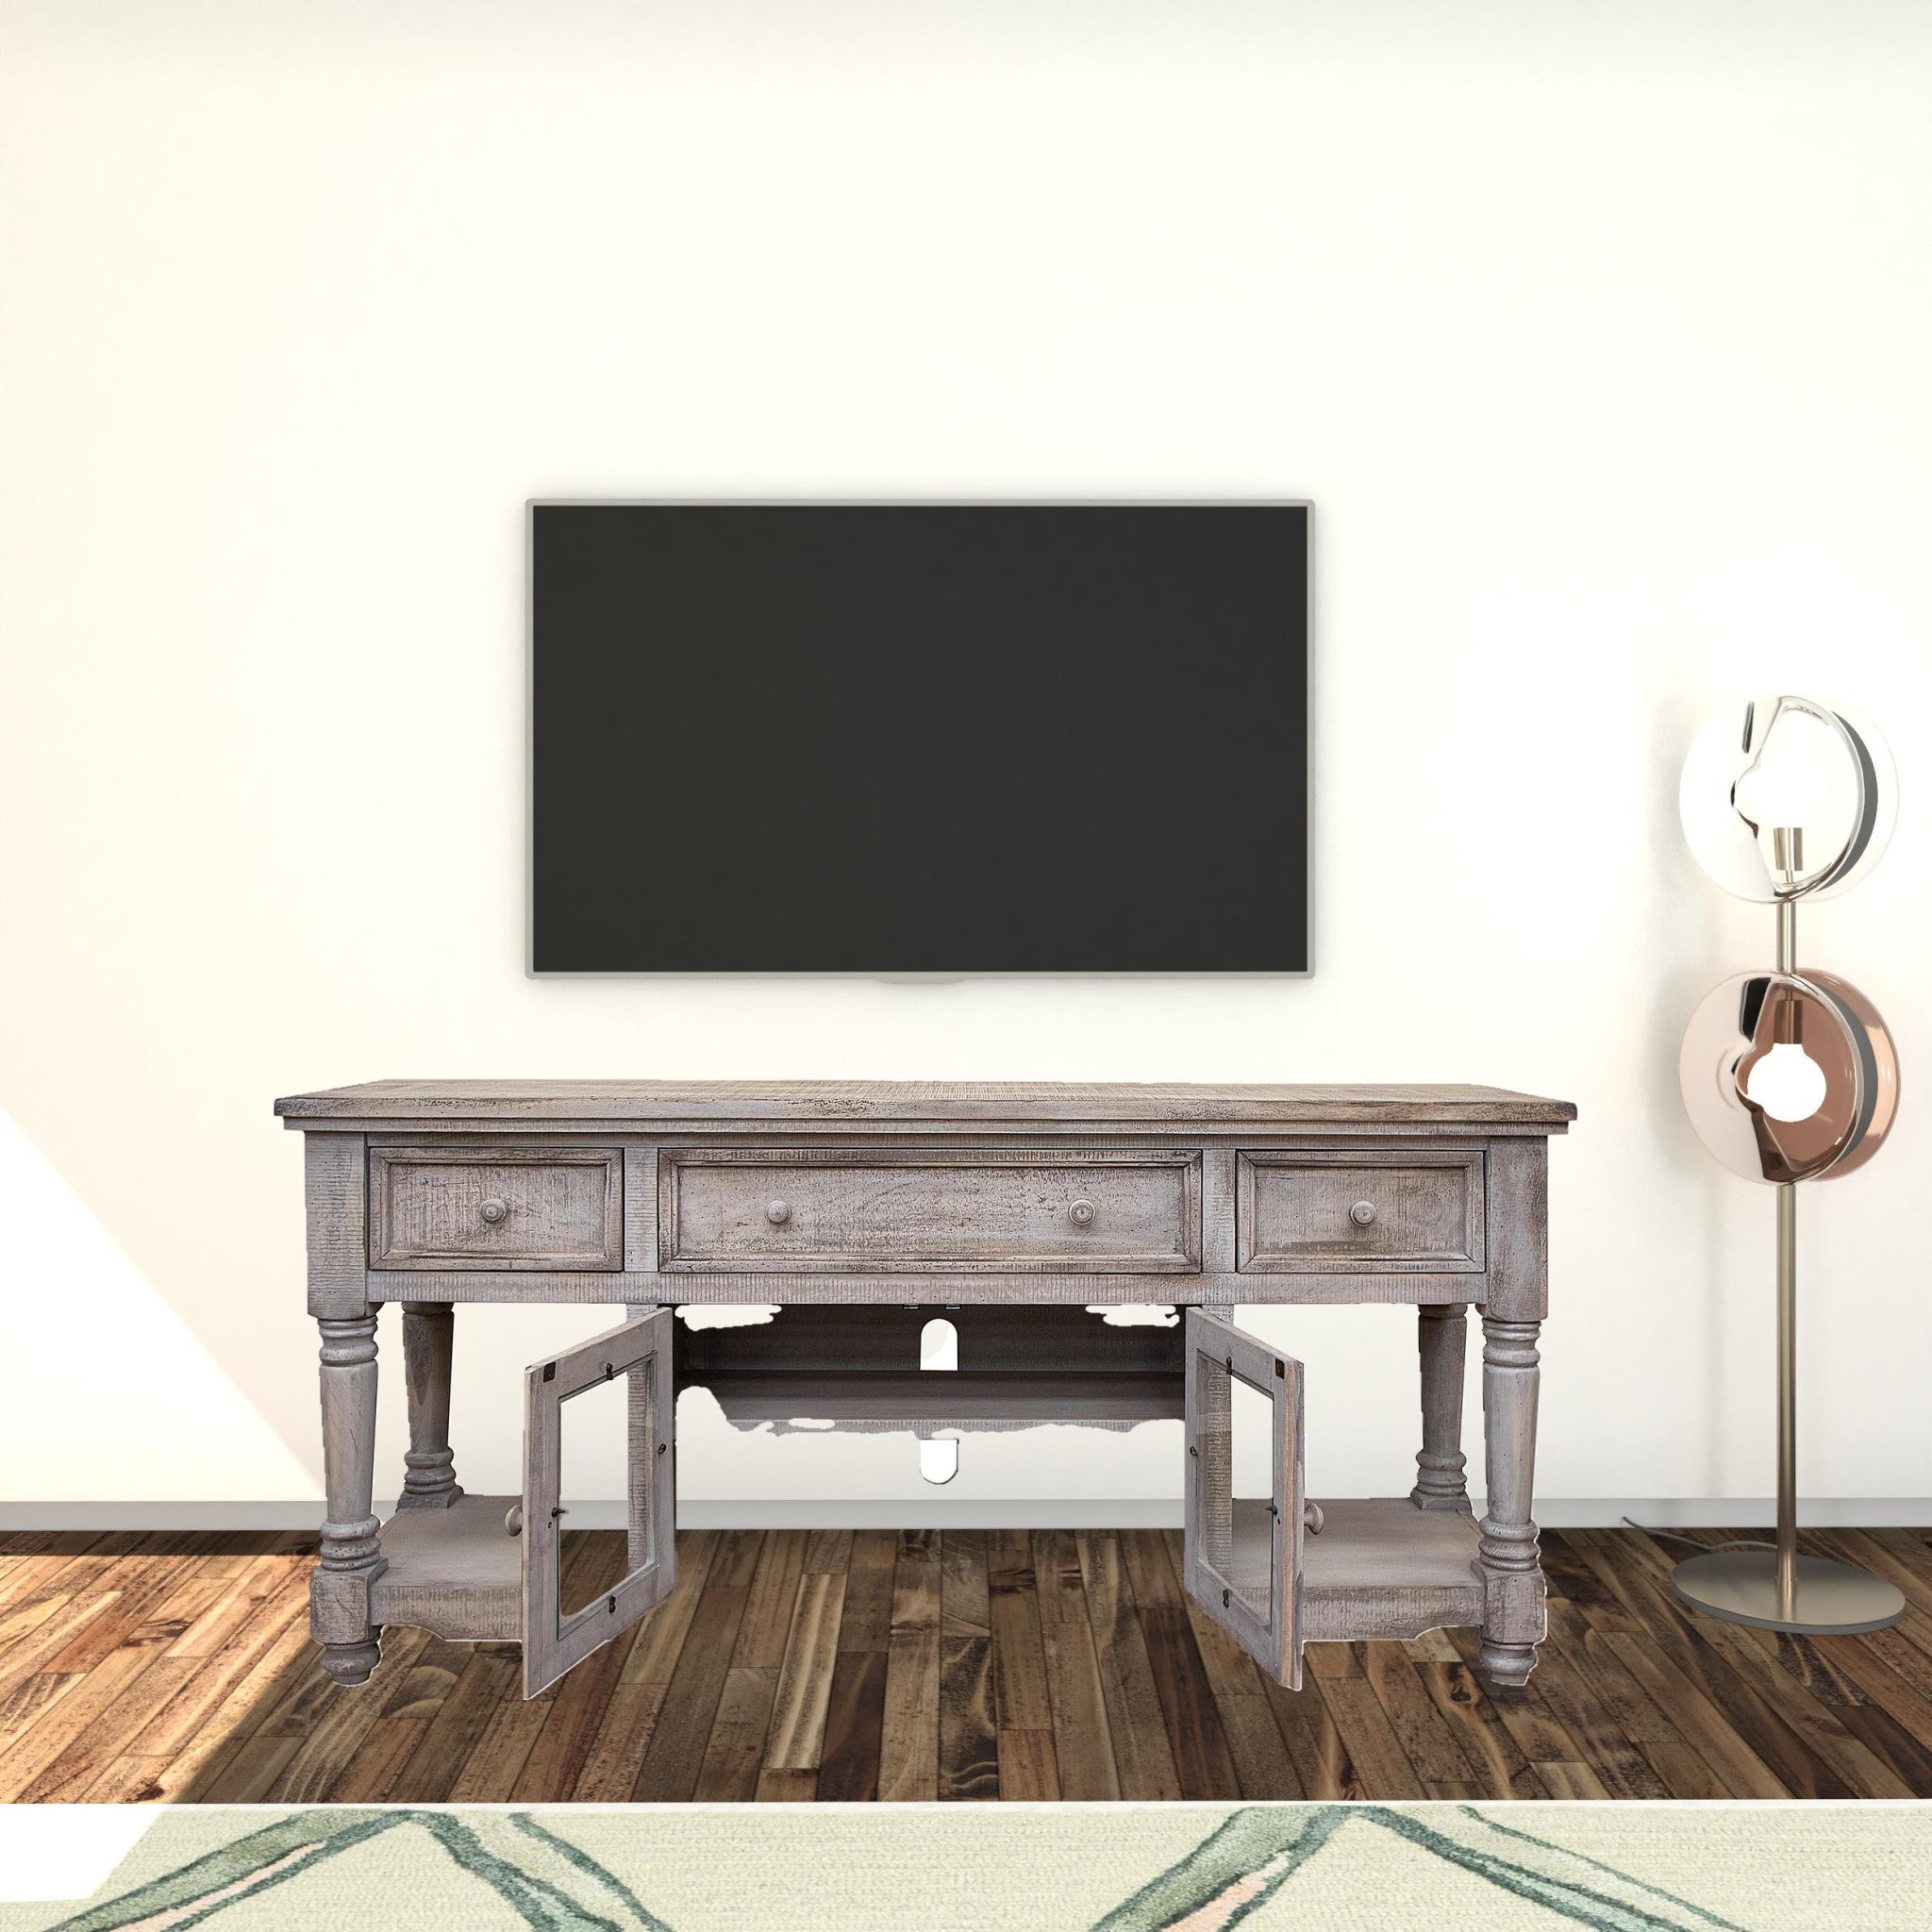 70" Desert Sand Solid Wood Open shelving Distressed TV Stand